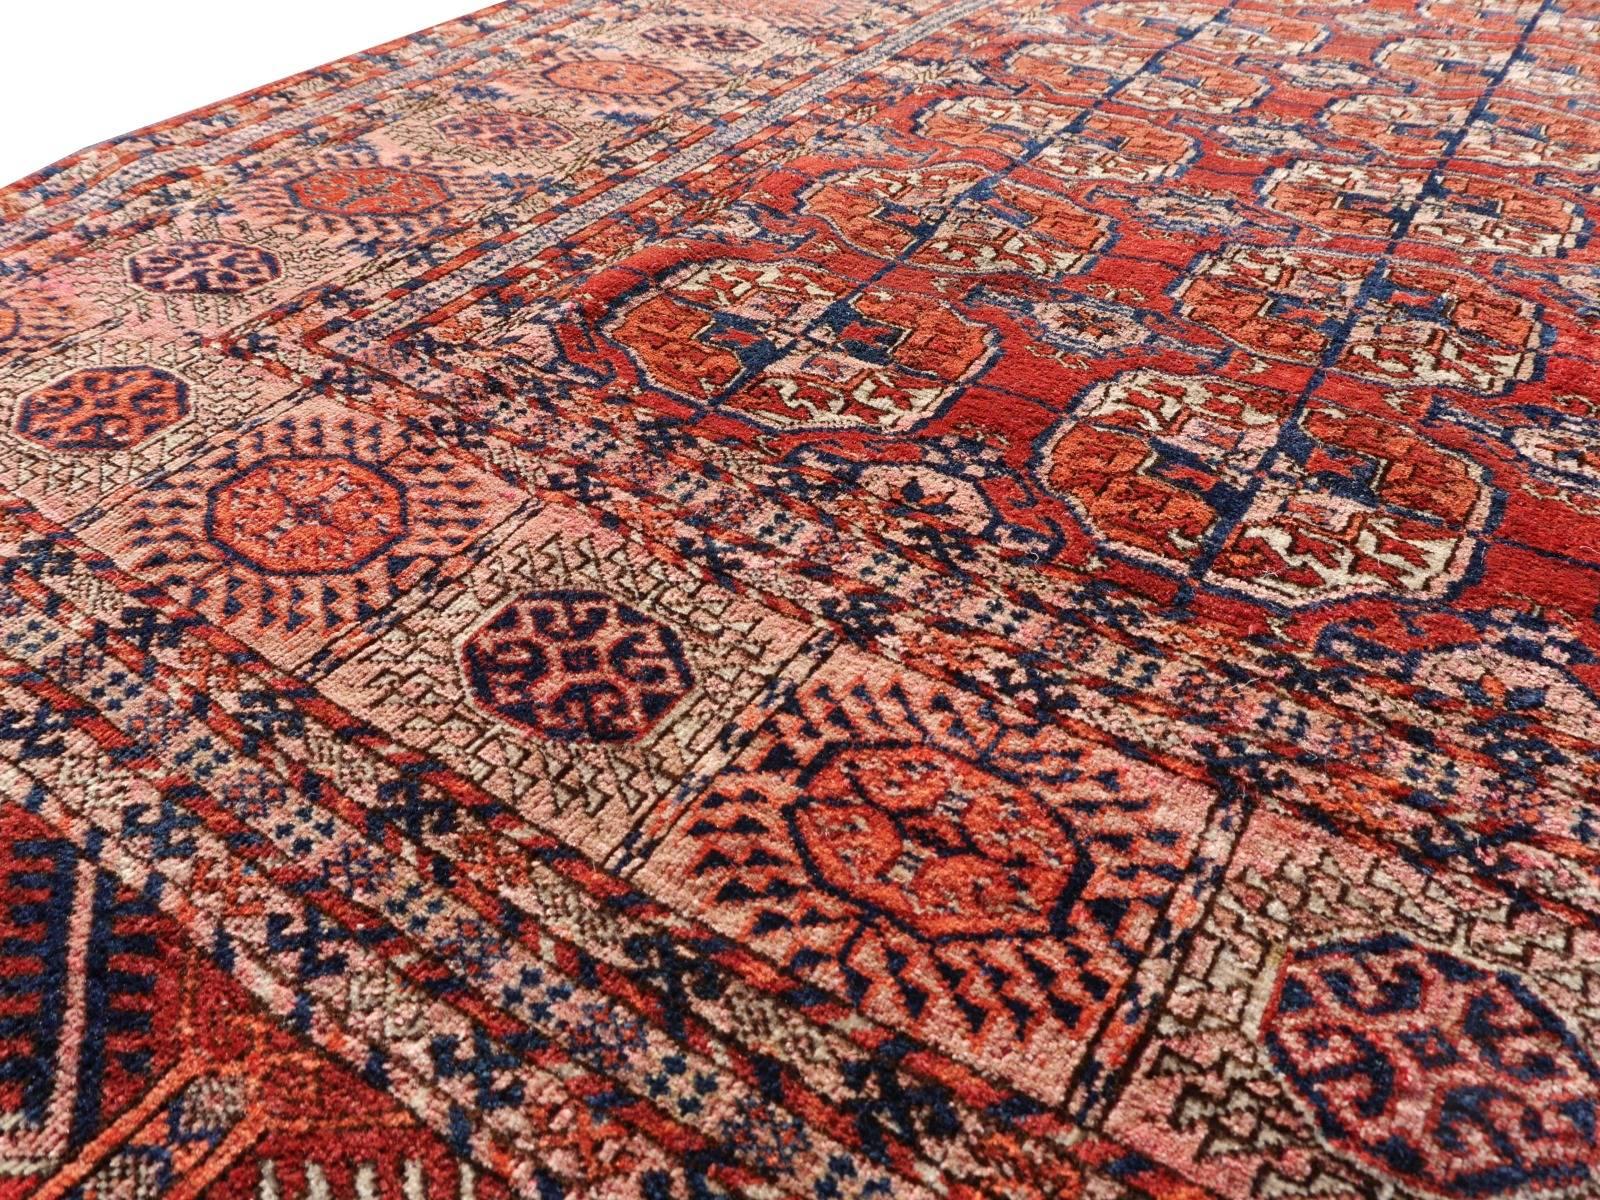 Fine hand-knotted Tekke Turkman Bokhara rug or Turkmen rug
Beautiful handknotted Bukhara Turkman Main Carpet. Main carpets are large rugs - regular Bukhara rugs are maximum 7 x 5 ft. The rug is in very good condition, no restoration or repair. One